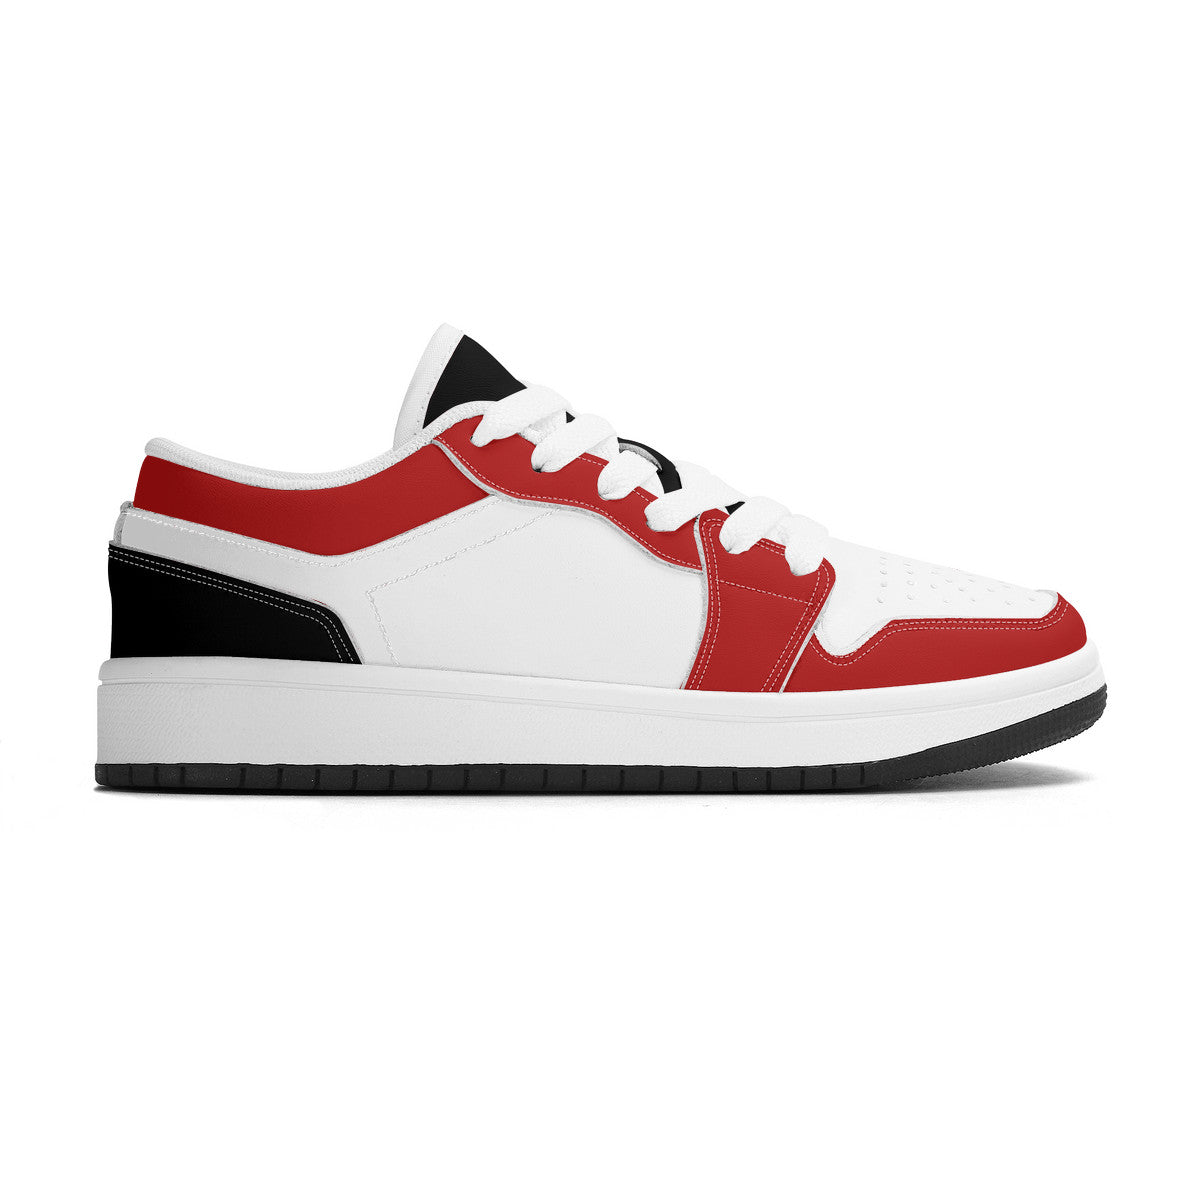 Personalize Your Own Kids Low-Top PU Leather Sneakers-Black, Red and White